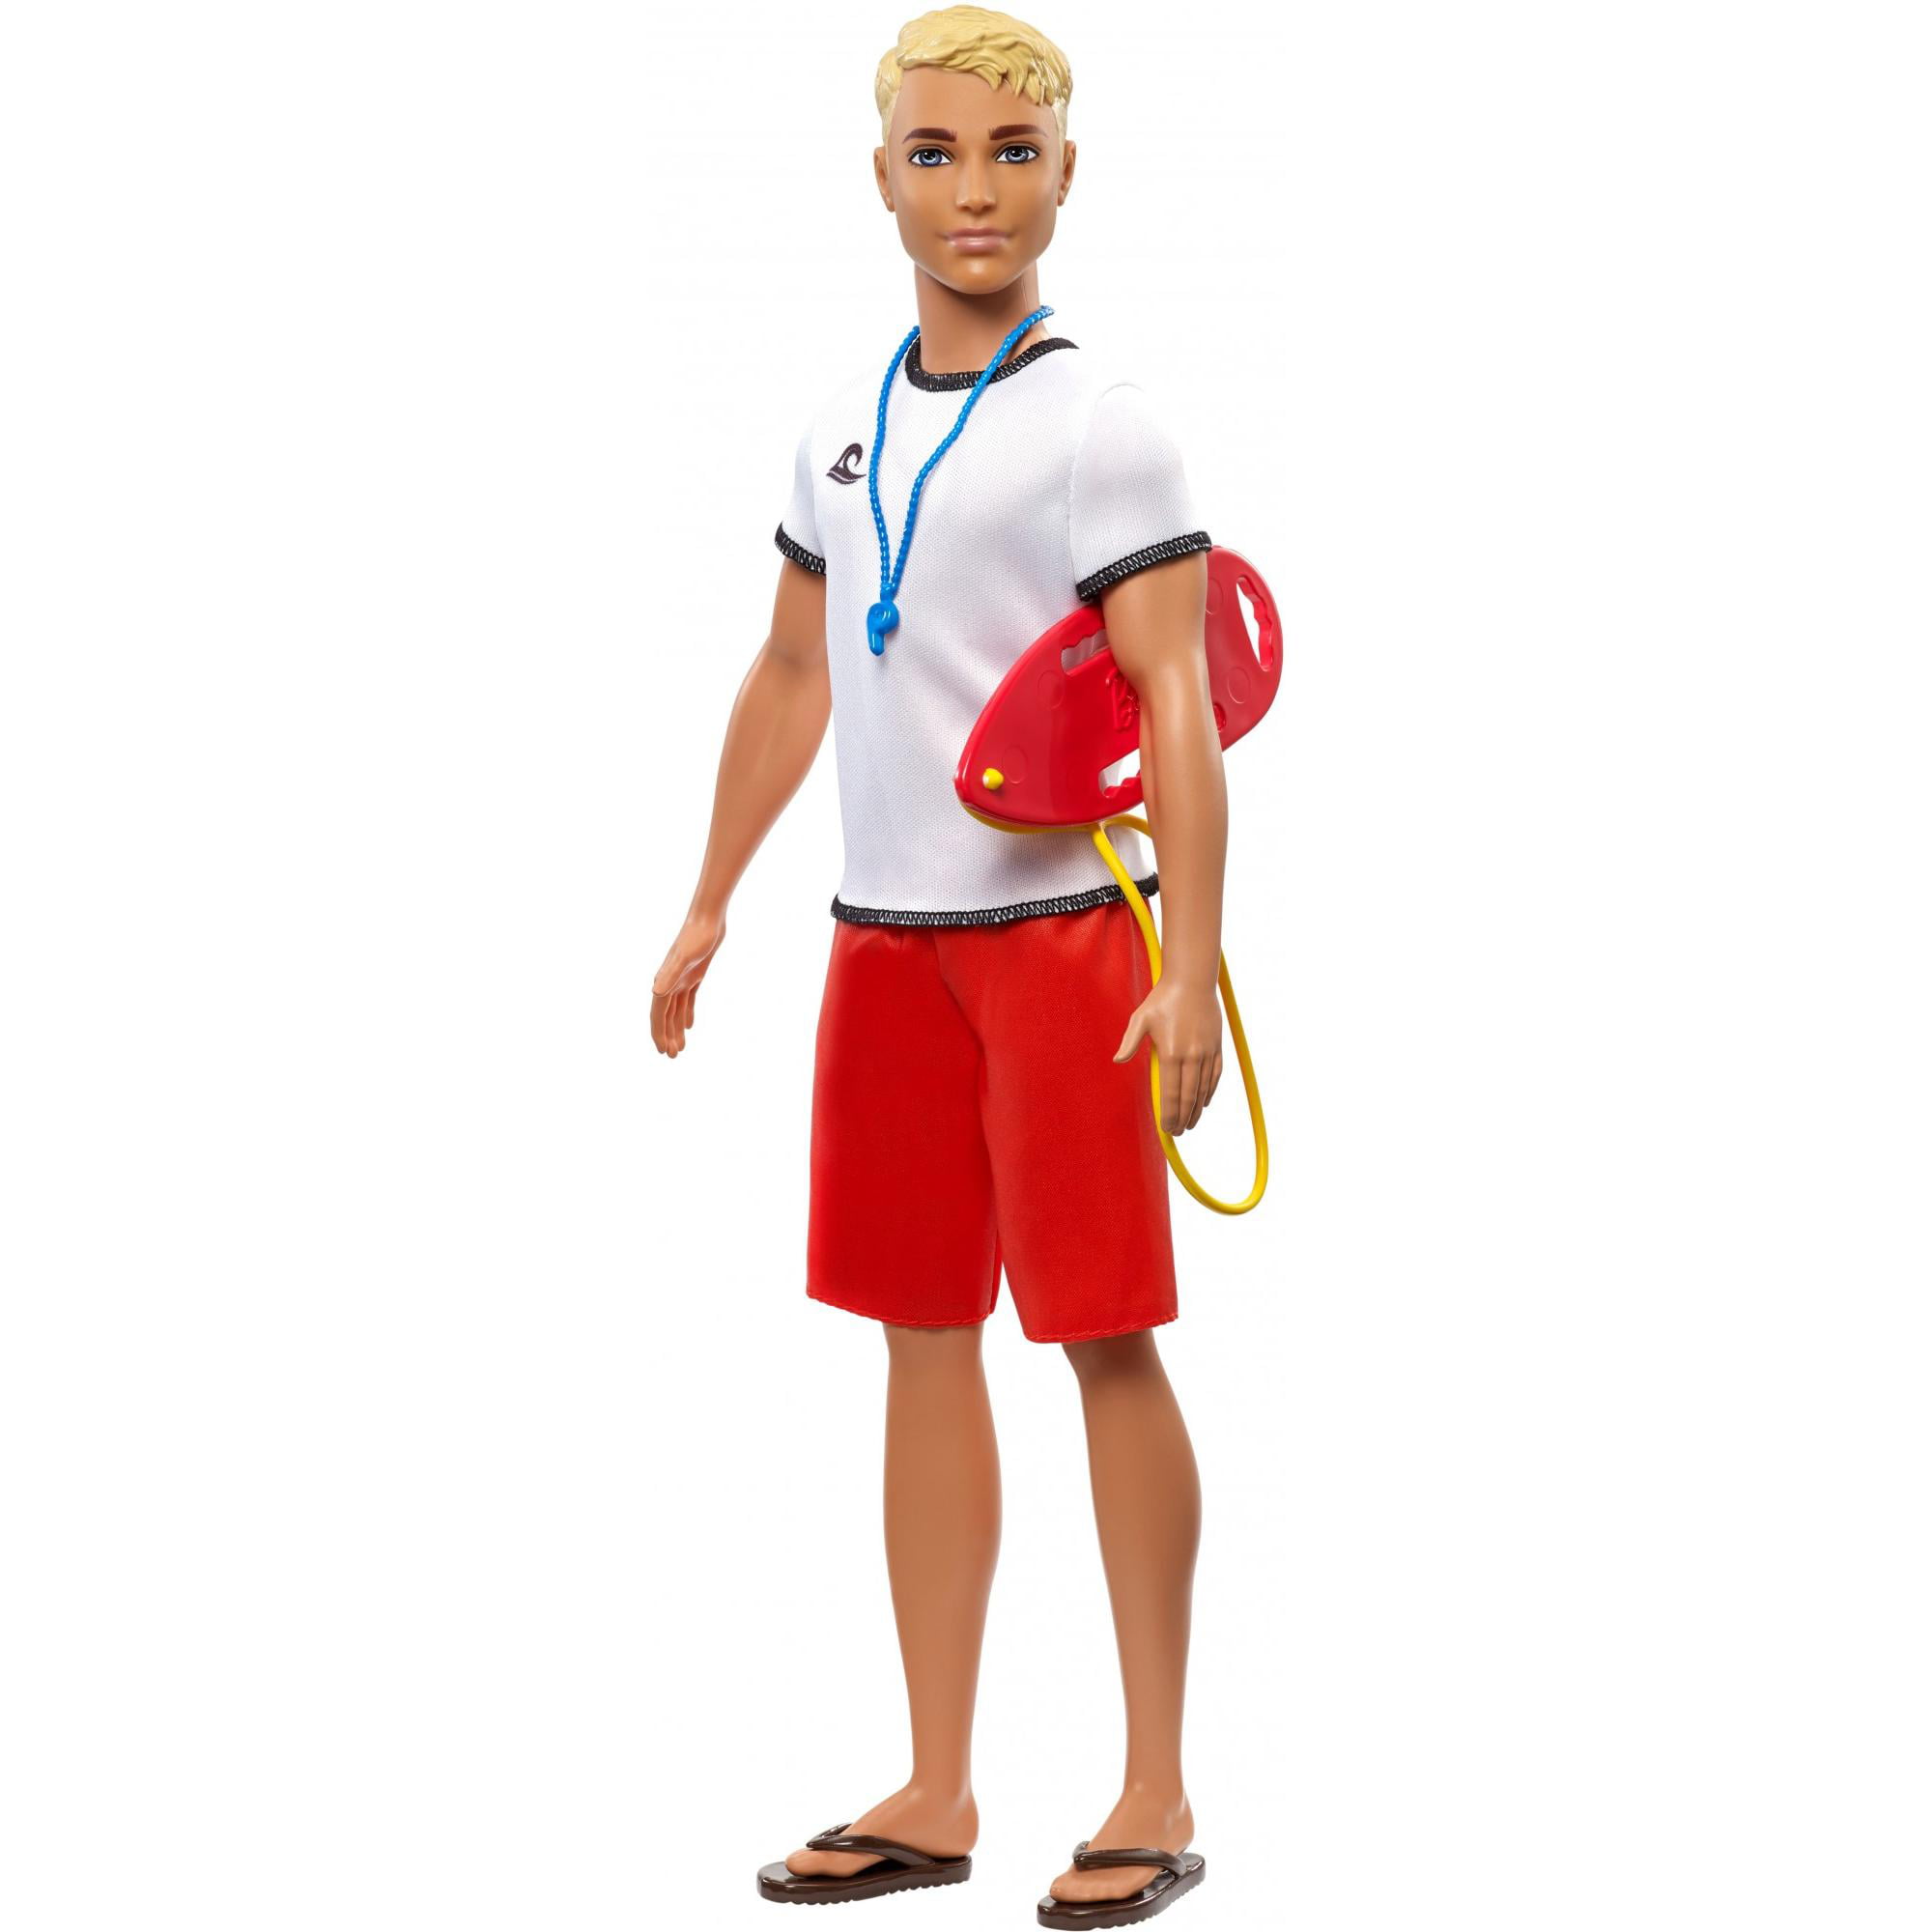 NEW BARBIE DOLL CAREER LIFEGUARD OUTFIT & ACCESSORY SET 